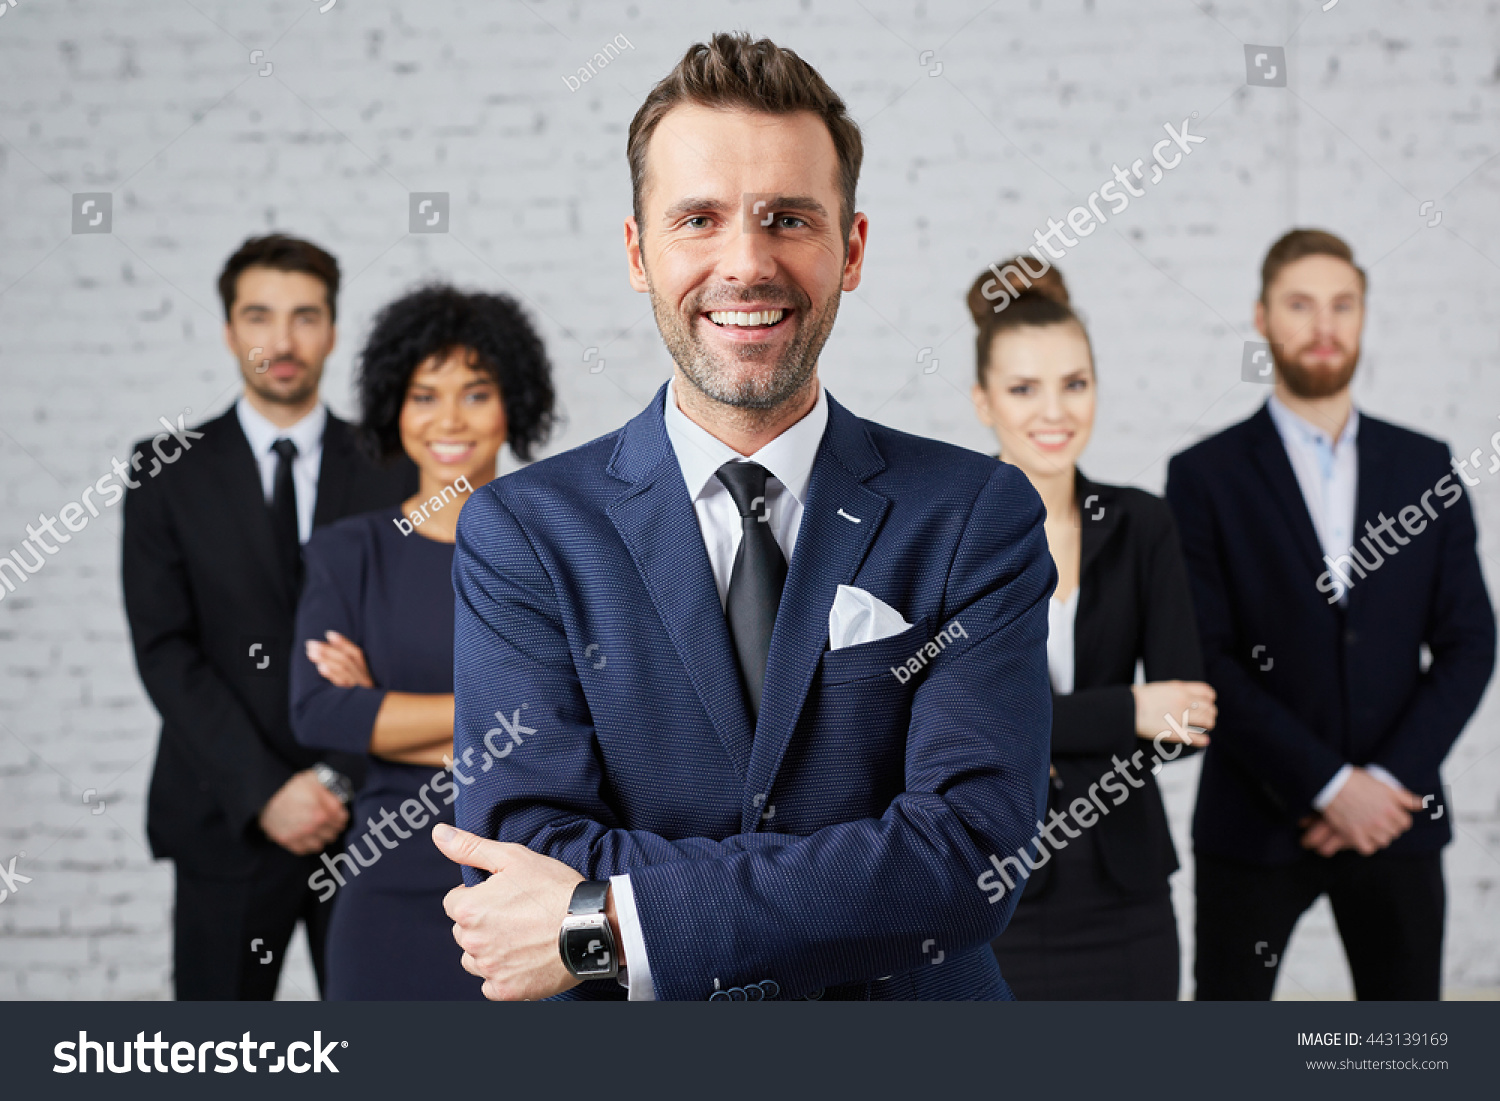 Group of business people with leader at front #443139169